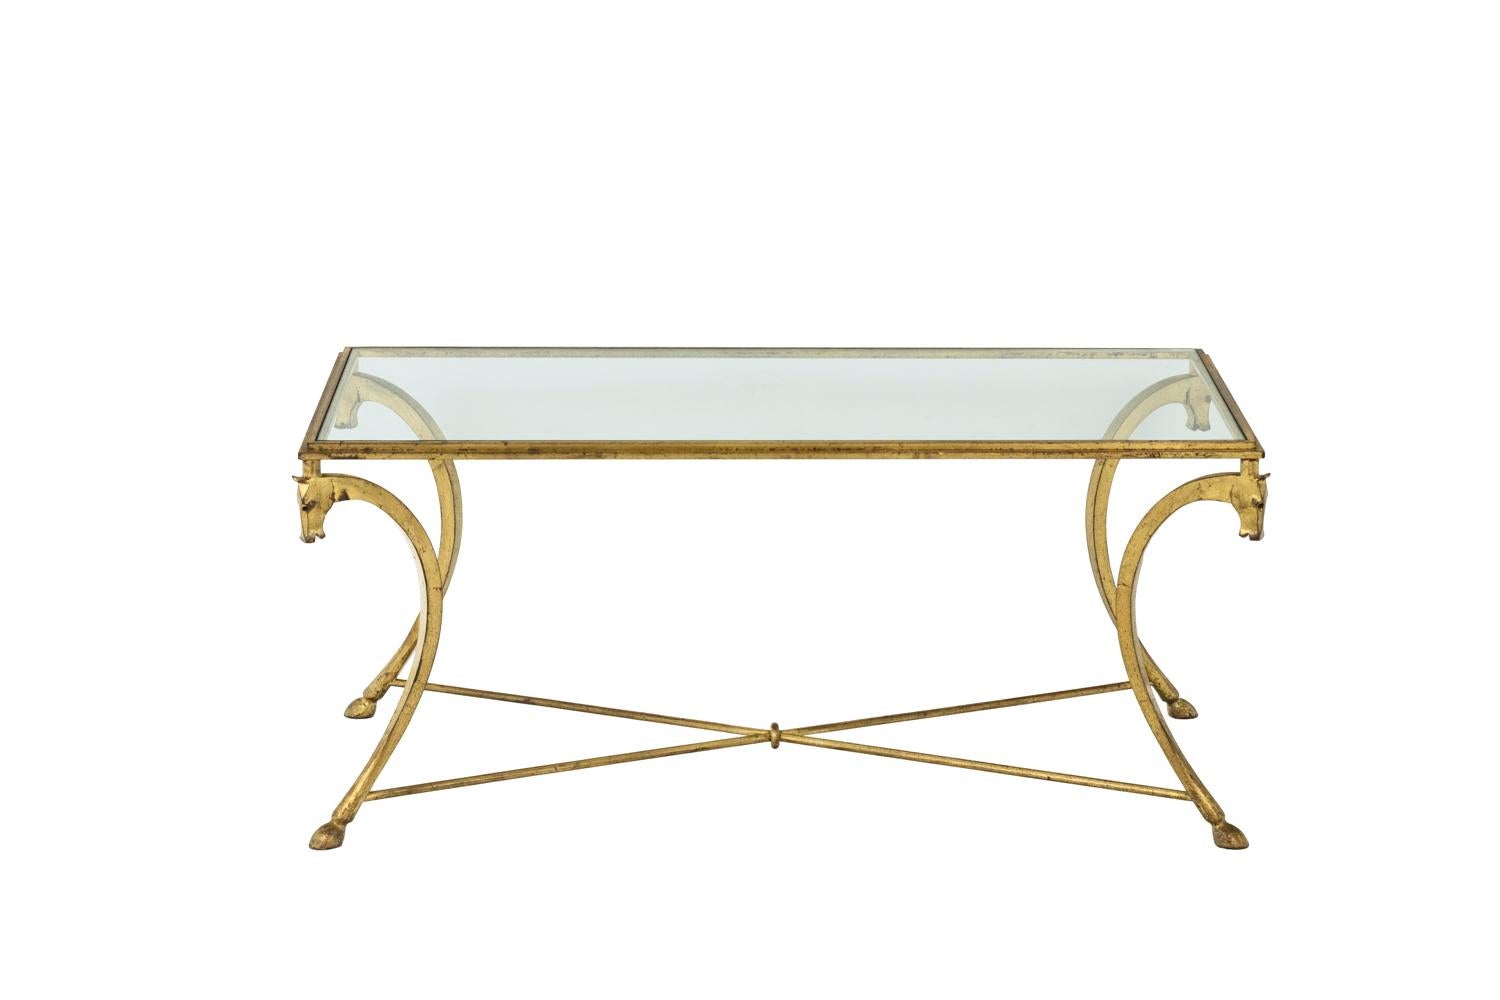 Jean-Charles Moreux for Maison Ramsay, in the style of.

Rectangular coffee table in gilt iron standing on four curved legs stylized as horse head and hoof connected by two X-shaped spacers. Tray in glass.

Work realized in the 1950’s.